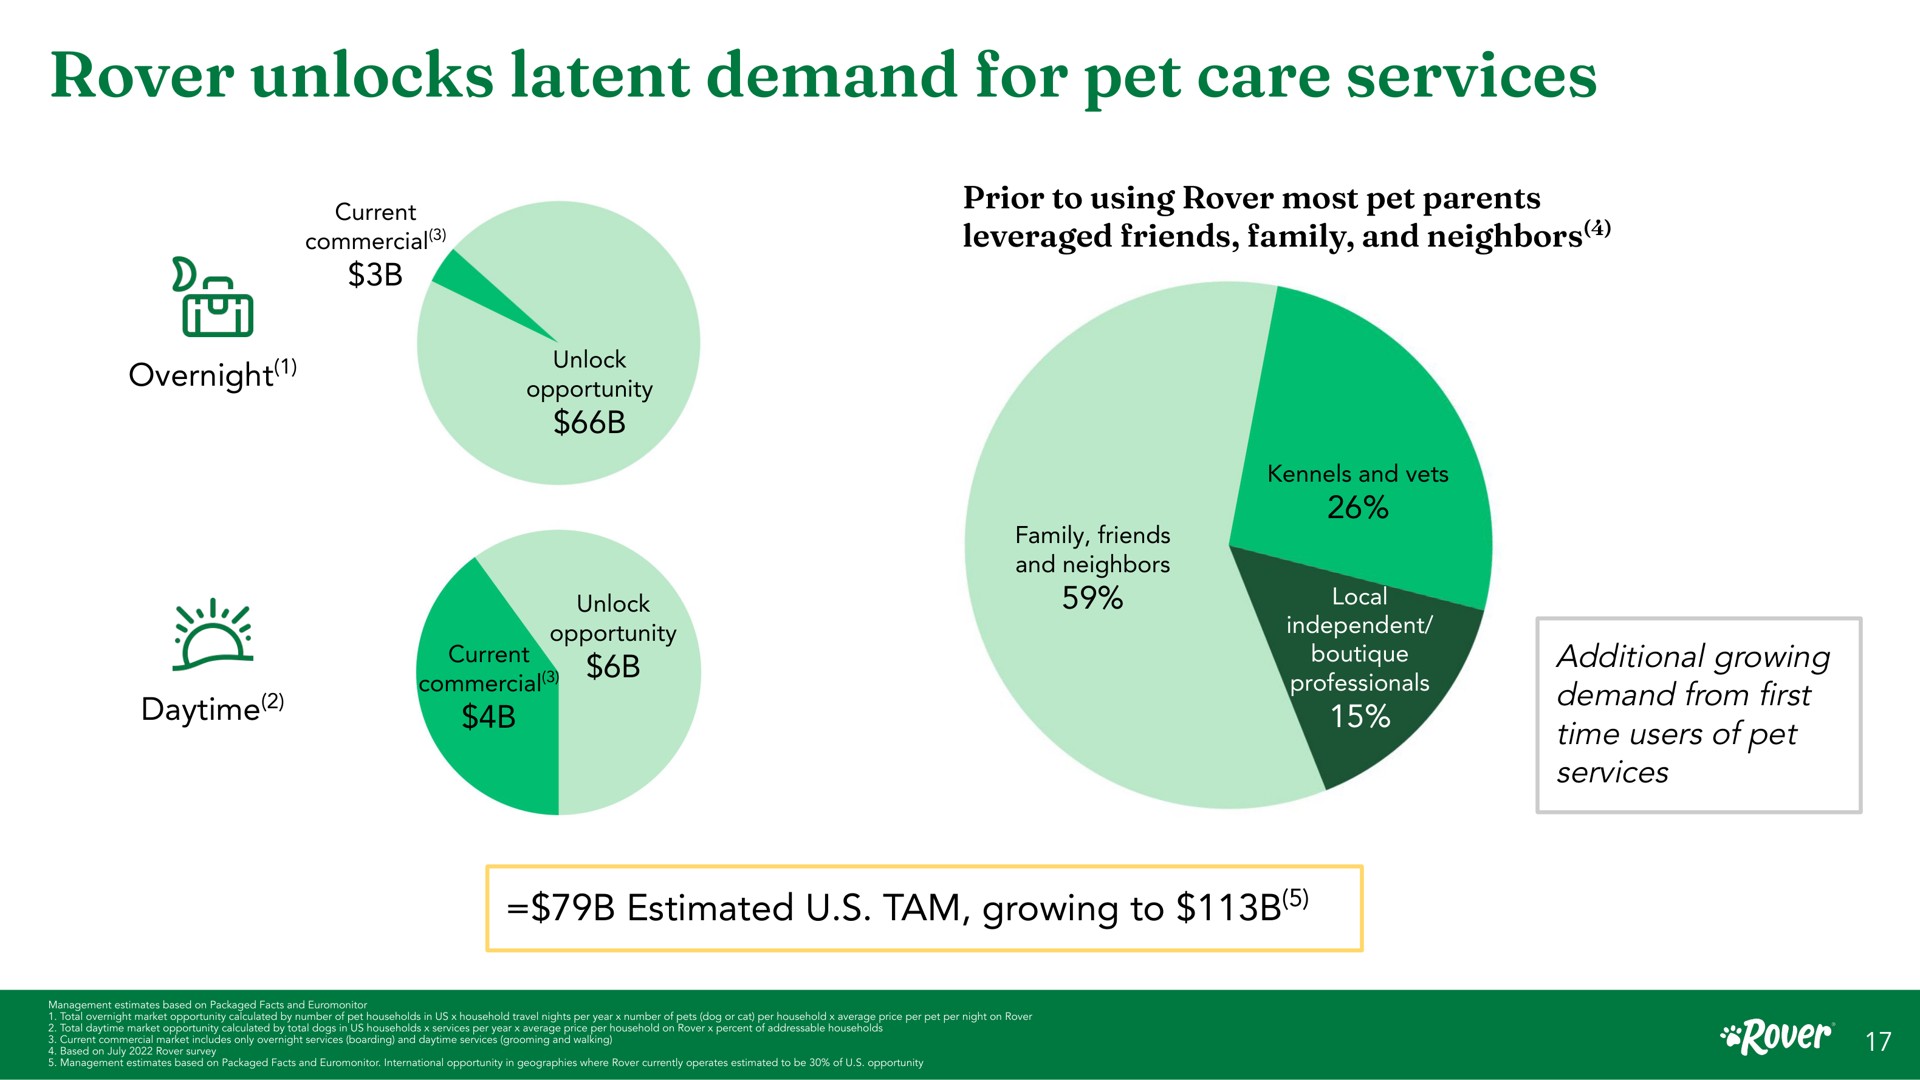 rover unlocks latent demand for pet care services current commercial overnight daytime unlock unlock opportunity prior to using most parents leveraged friends family and neighbors family friends and neighbors local professionals on additional growing from first time users of estimated tam growing to | Rover